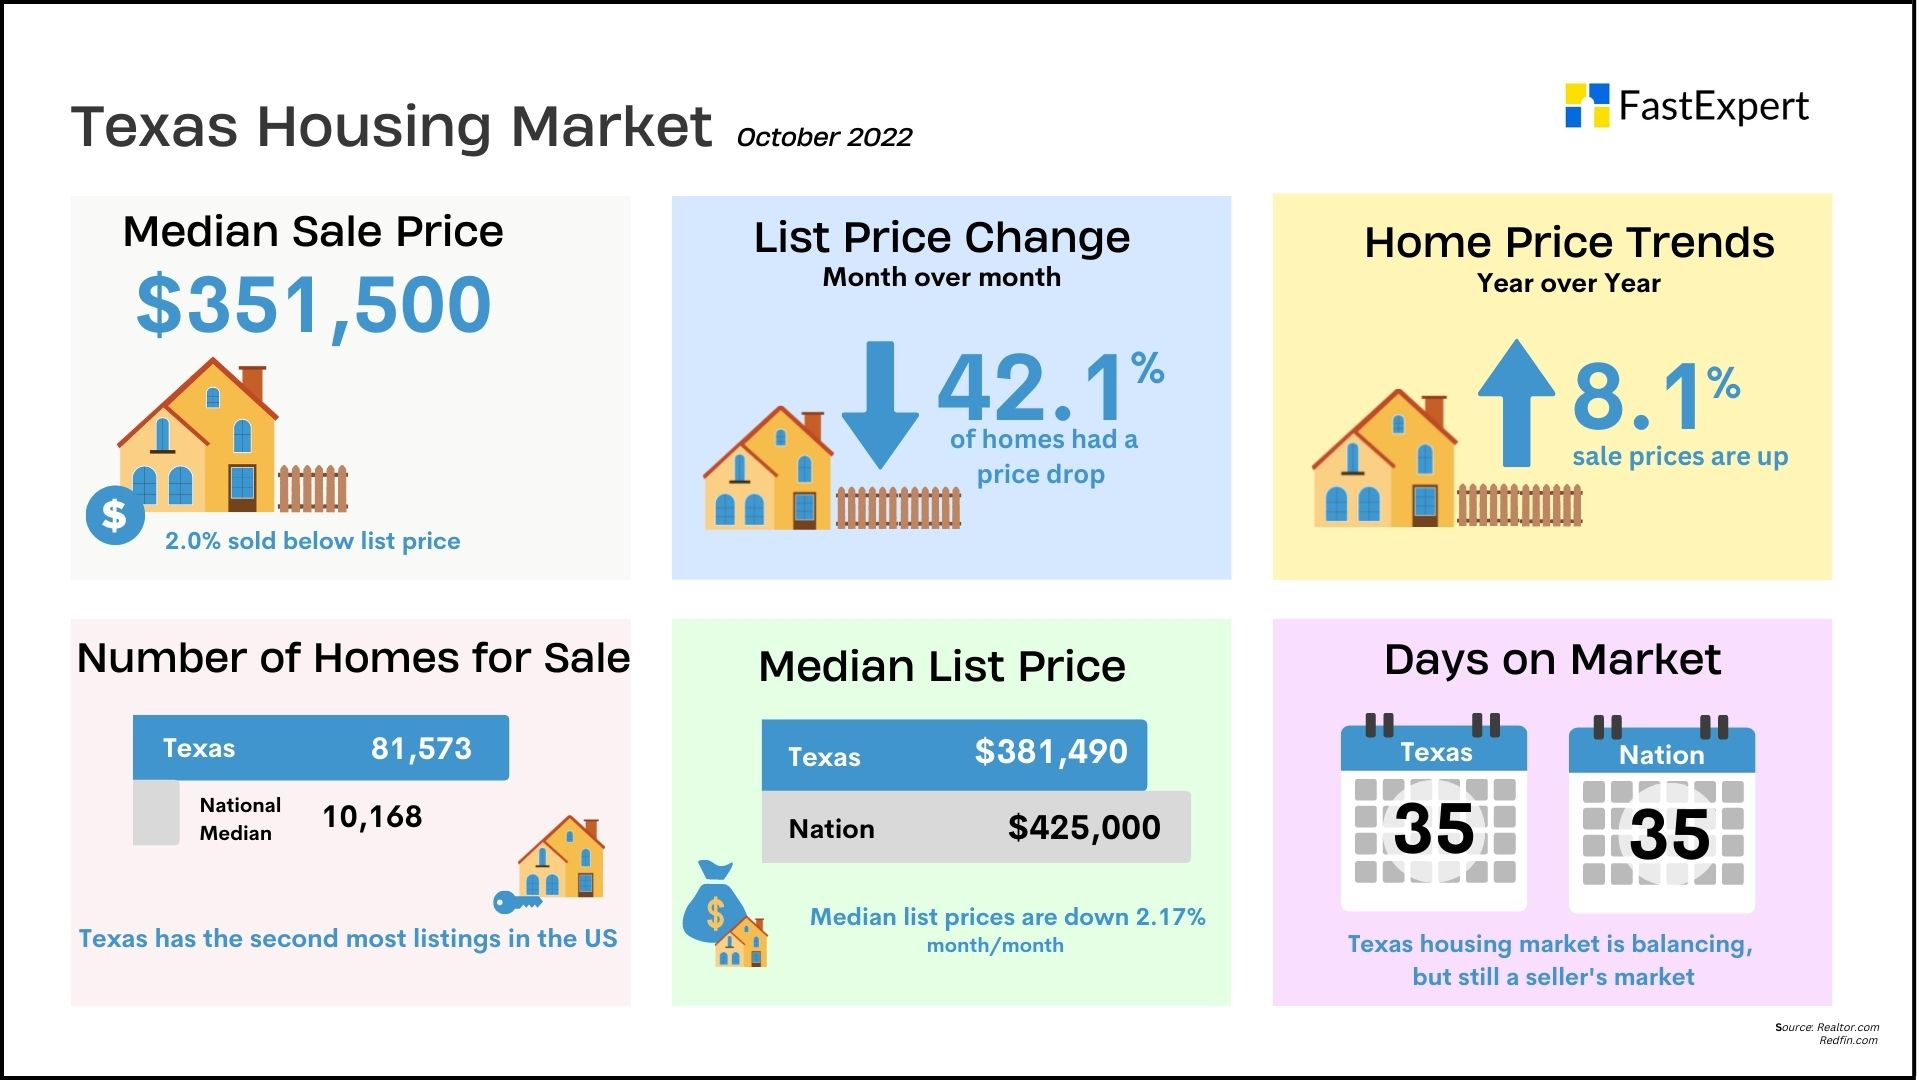 Texas Housing Market Trends and Predictions (2022)